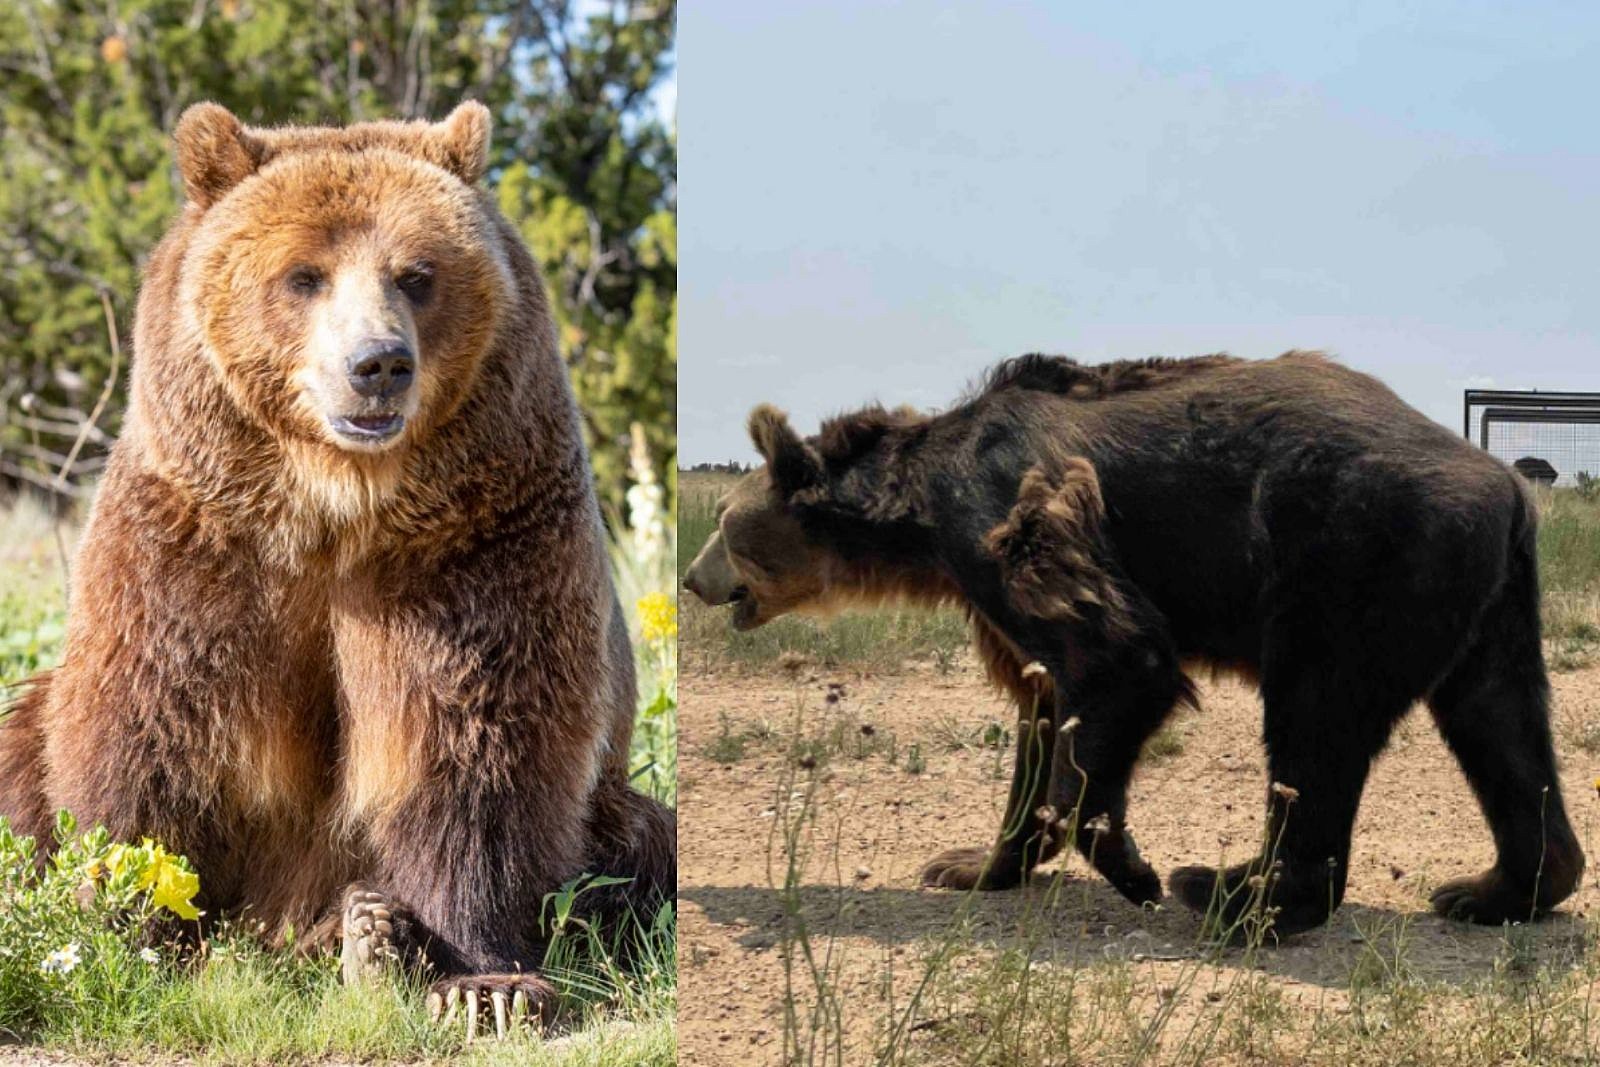 Colorado's Wild Animal Sanctuary Rescues Two Bears from Lebanon